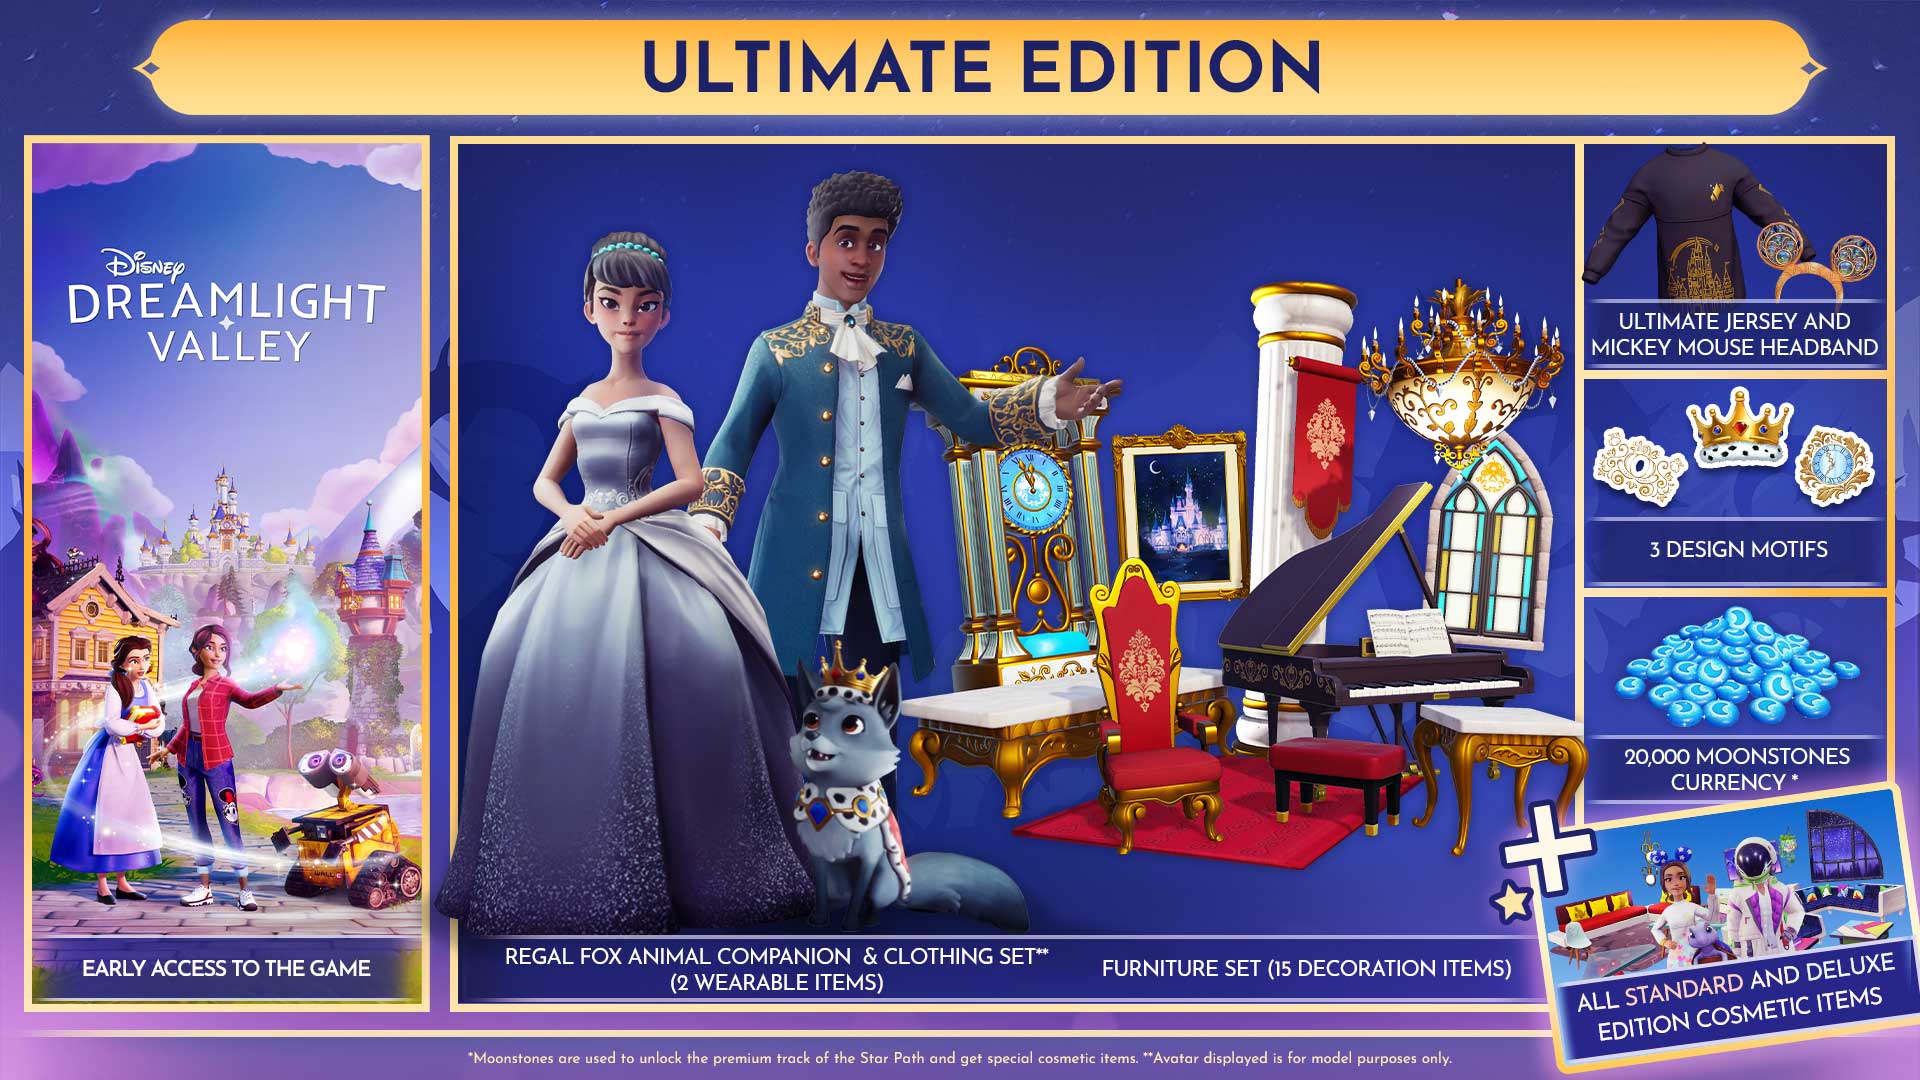 Disney Dreamlight Valley Founder's Pack Editions pre-orders open